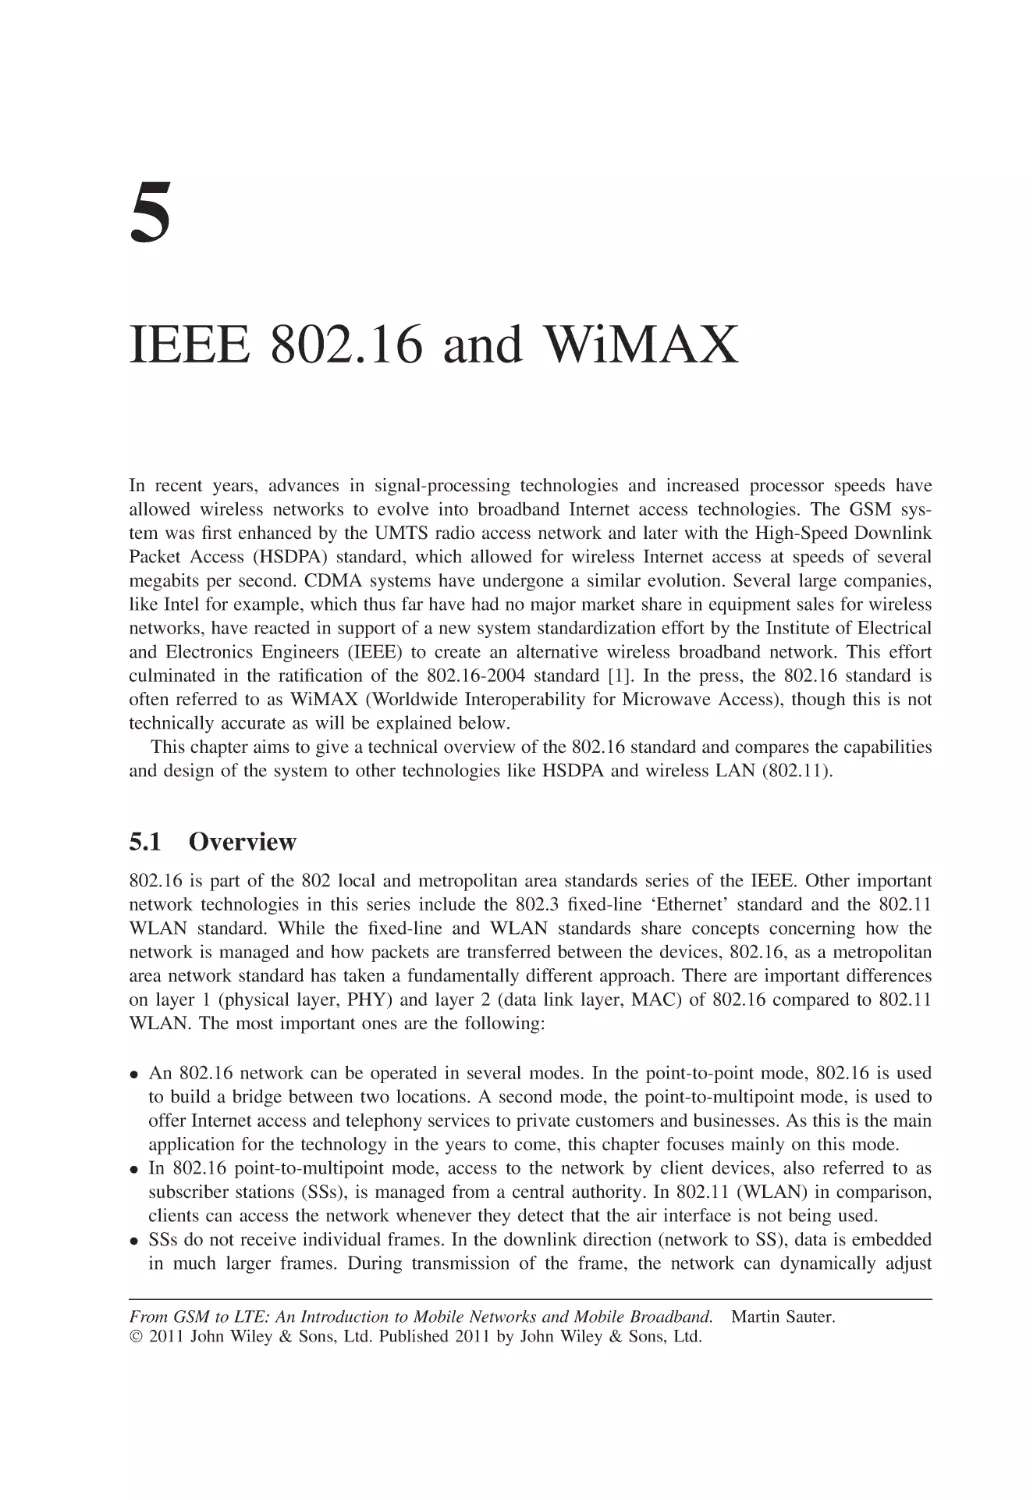 5 IEEE 802.16 and WiMAX
5.1 Overview